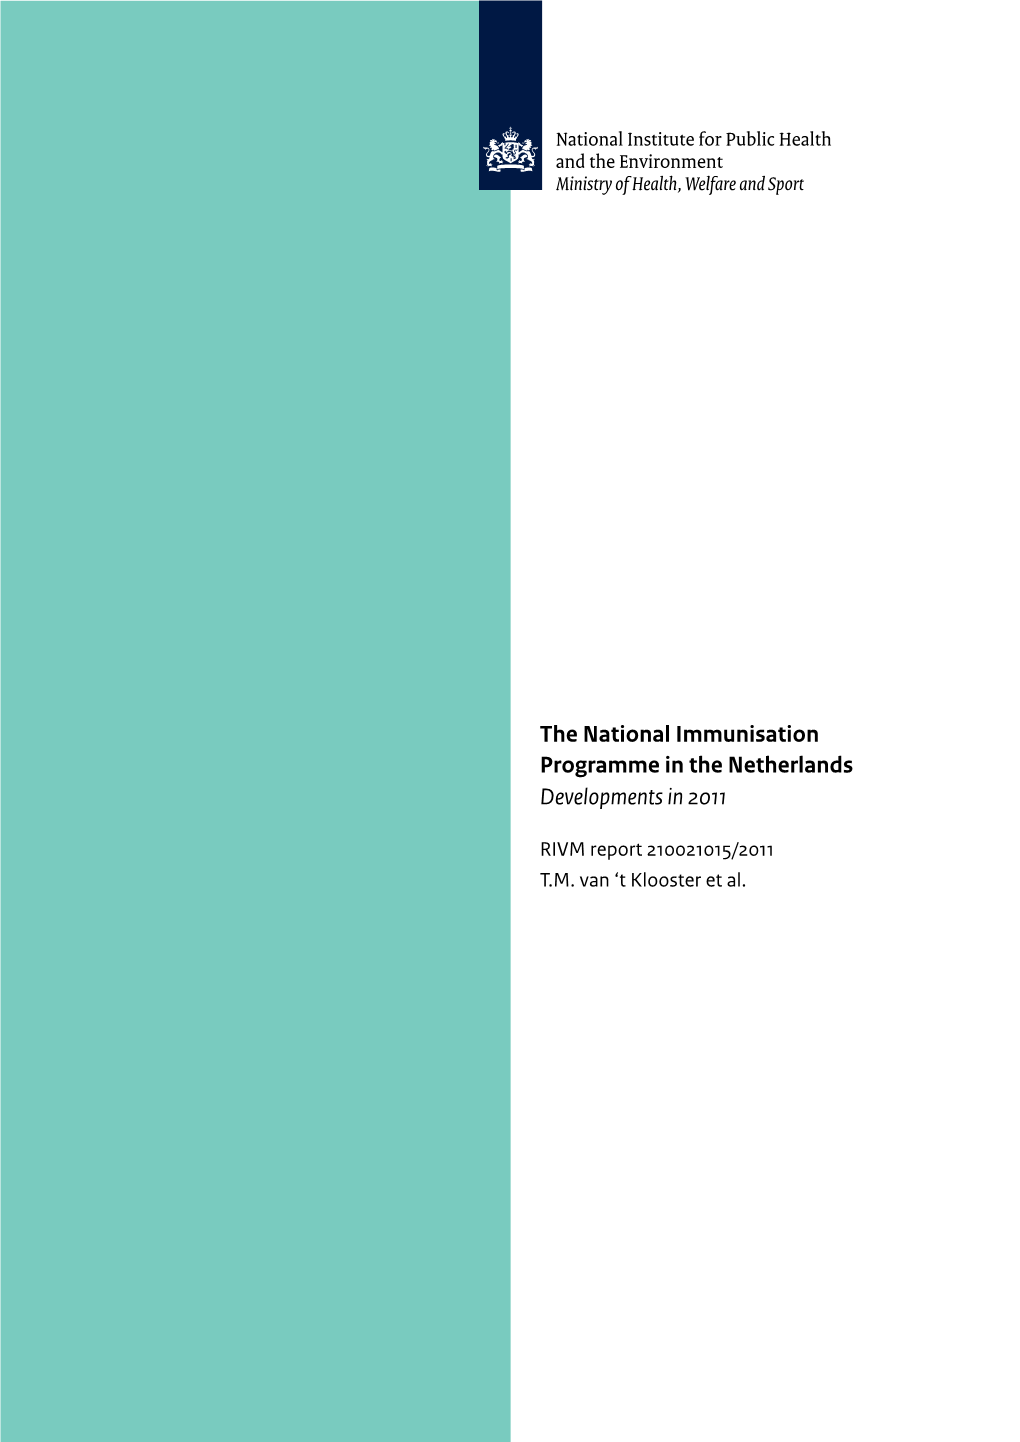 The National Immunisation Programme in the Netherlands Developments in 2011